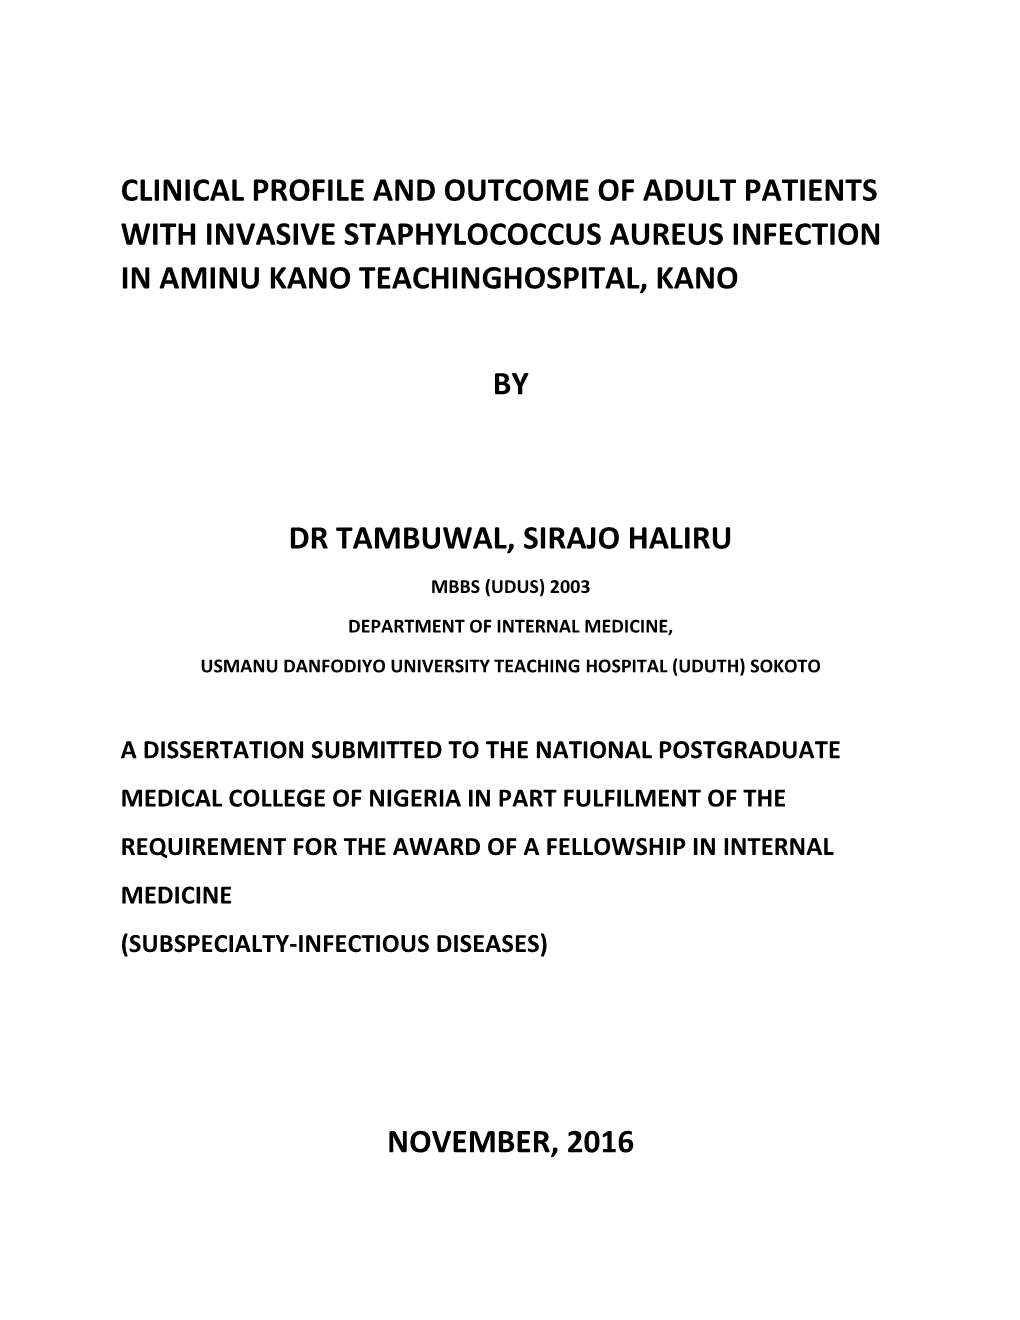 Clinical Profile and Outcome of Adult Patients with Invasive Staphylococcus Aureus Infection in Aminu Kano Teachinghospital, Kano